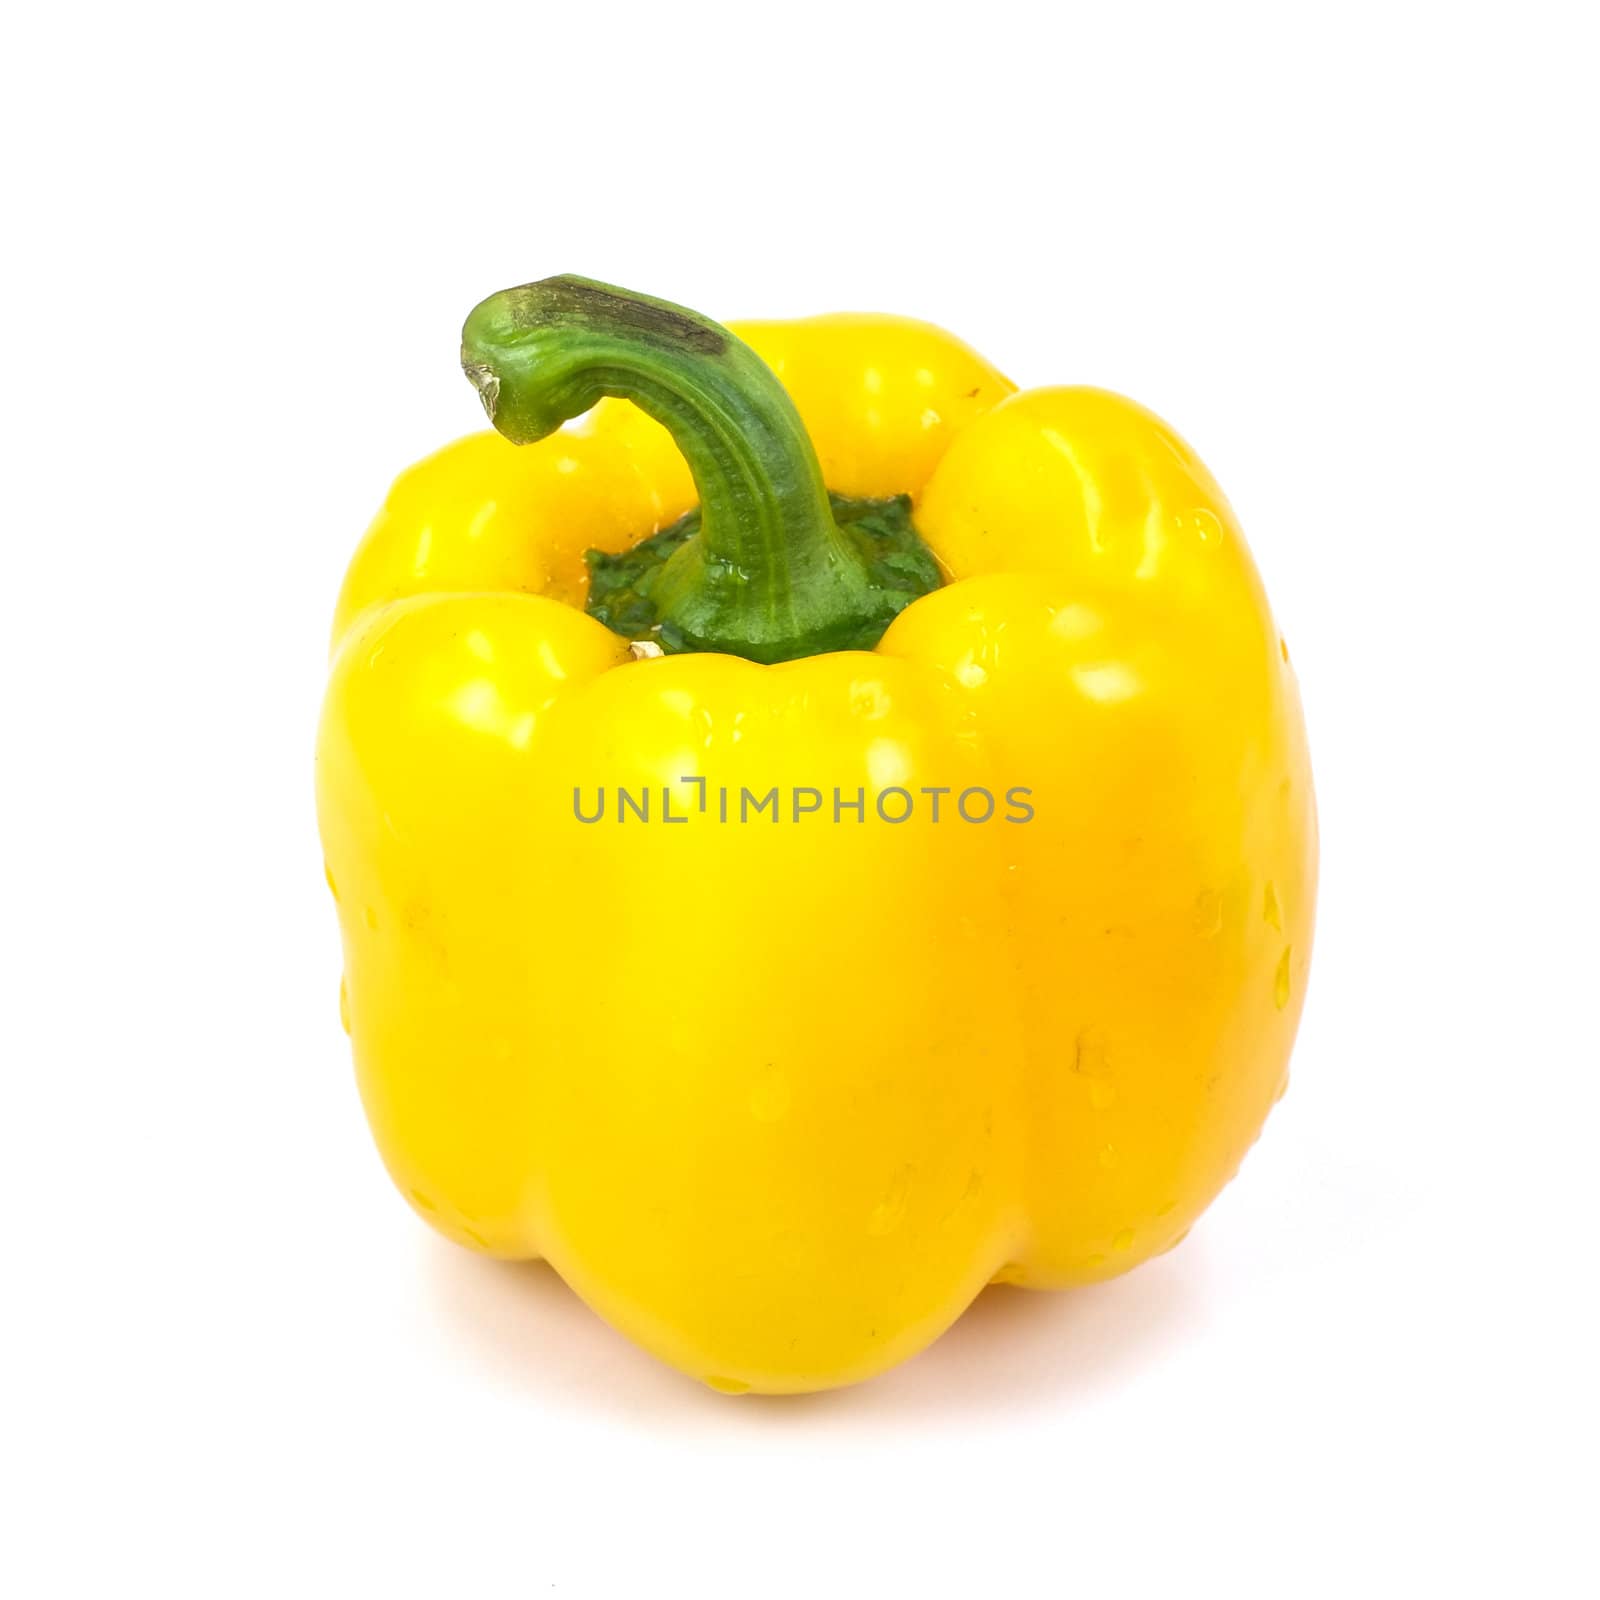 Colored paprika (pepper) isolated on a white background